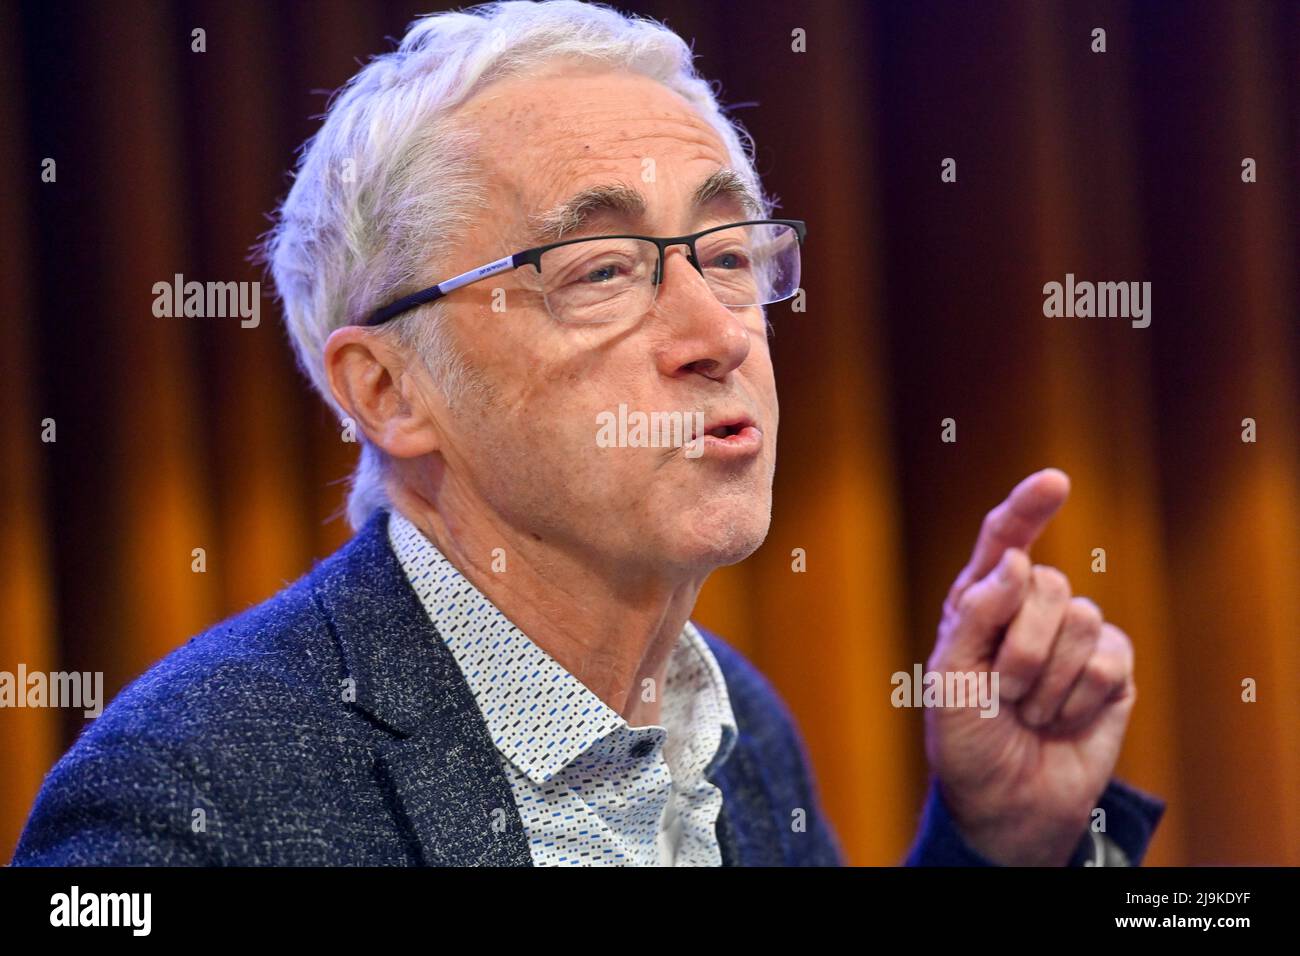 Prague, Czech Republic. 24th May, 2022. Paul de Grauwe Professor of European Political Economy at the London School of Economics speaks during the debate on the euro and the issues relating to its adoption in the Czech Republic, in Prague, May 24, 2022. Credit: Vit Simanek/CTK Photo/Alamy Live News Stock Photo